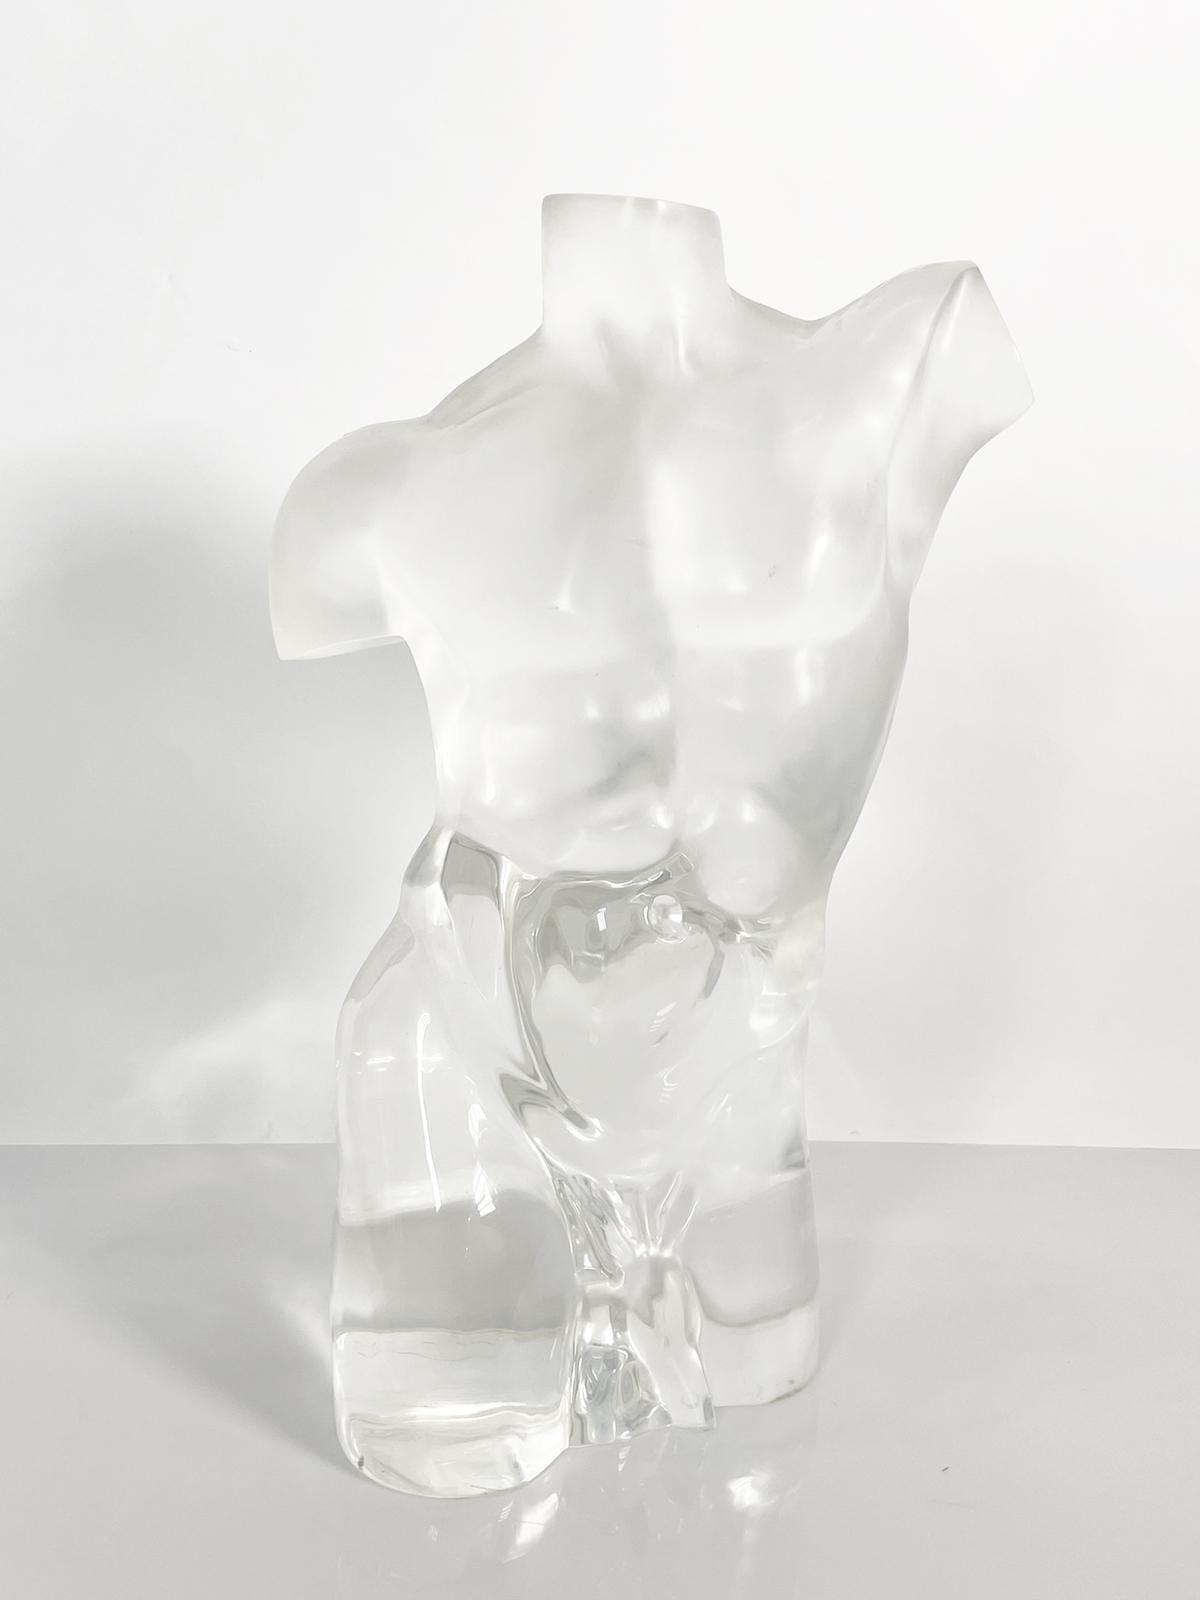 Introducing our stunning Nude Male Sculpture in Solid Lucite, Circa 1970's. This one-of-a-kind piece of furniture is a true masterpiece, expertly crafted to capture the essence of the human form. The sculpture is made from solid lucite, giving it a